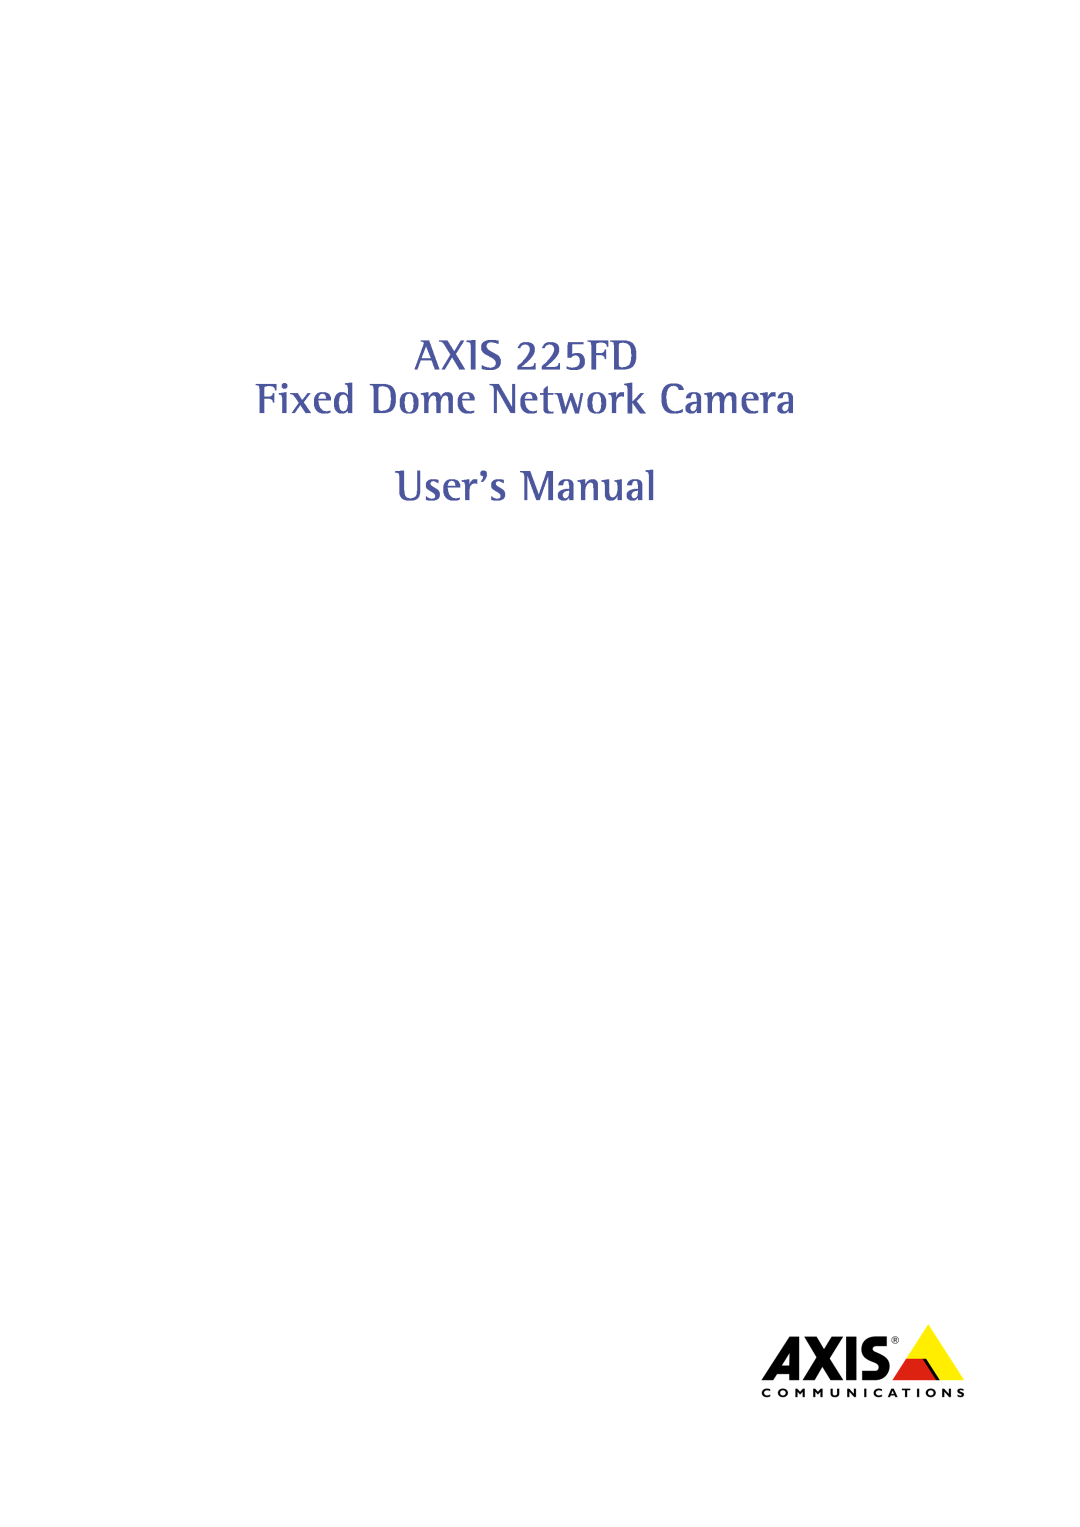 Axis Communications axis fixed dome network camera user manual AXIS 225FD Fixed Dome Network Camera User’s Manual 